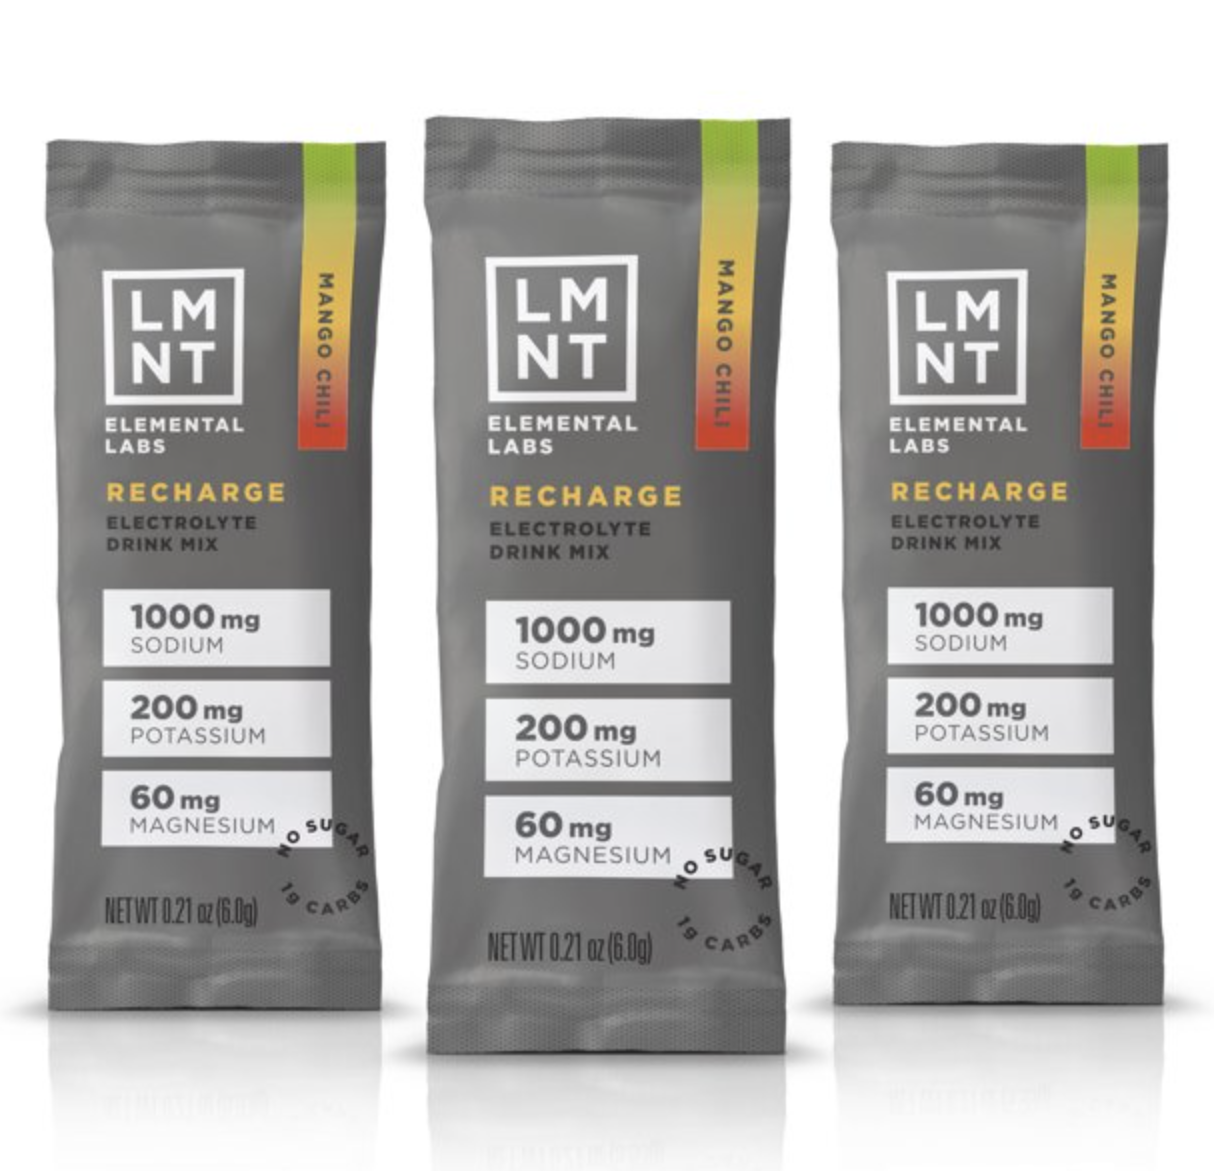 LMNT electrolyte drink packets